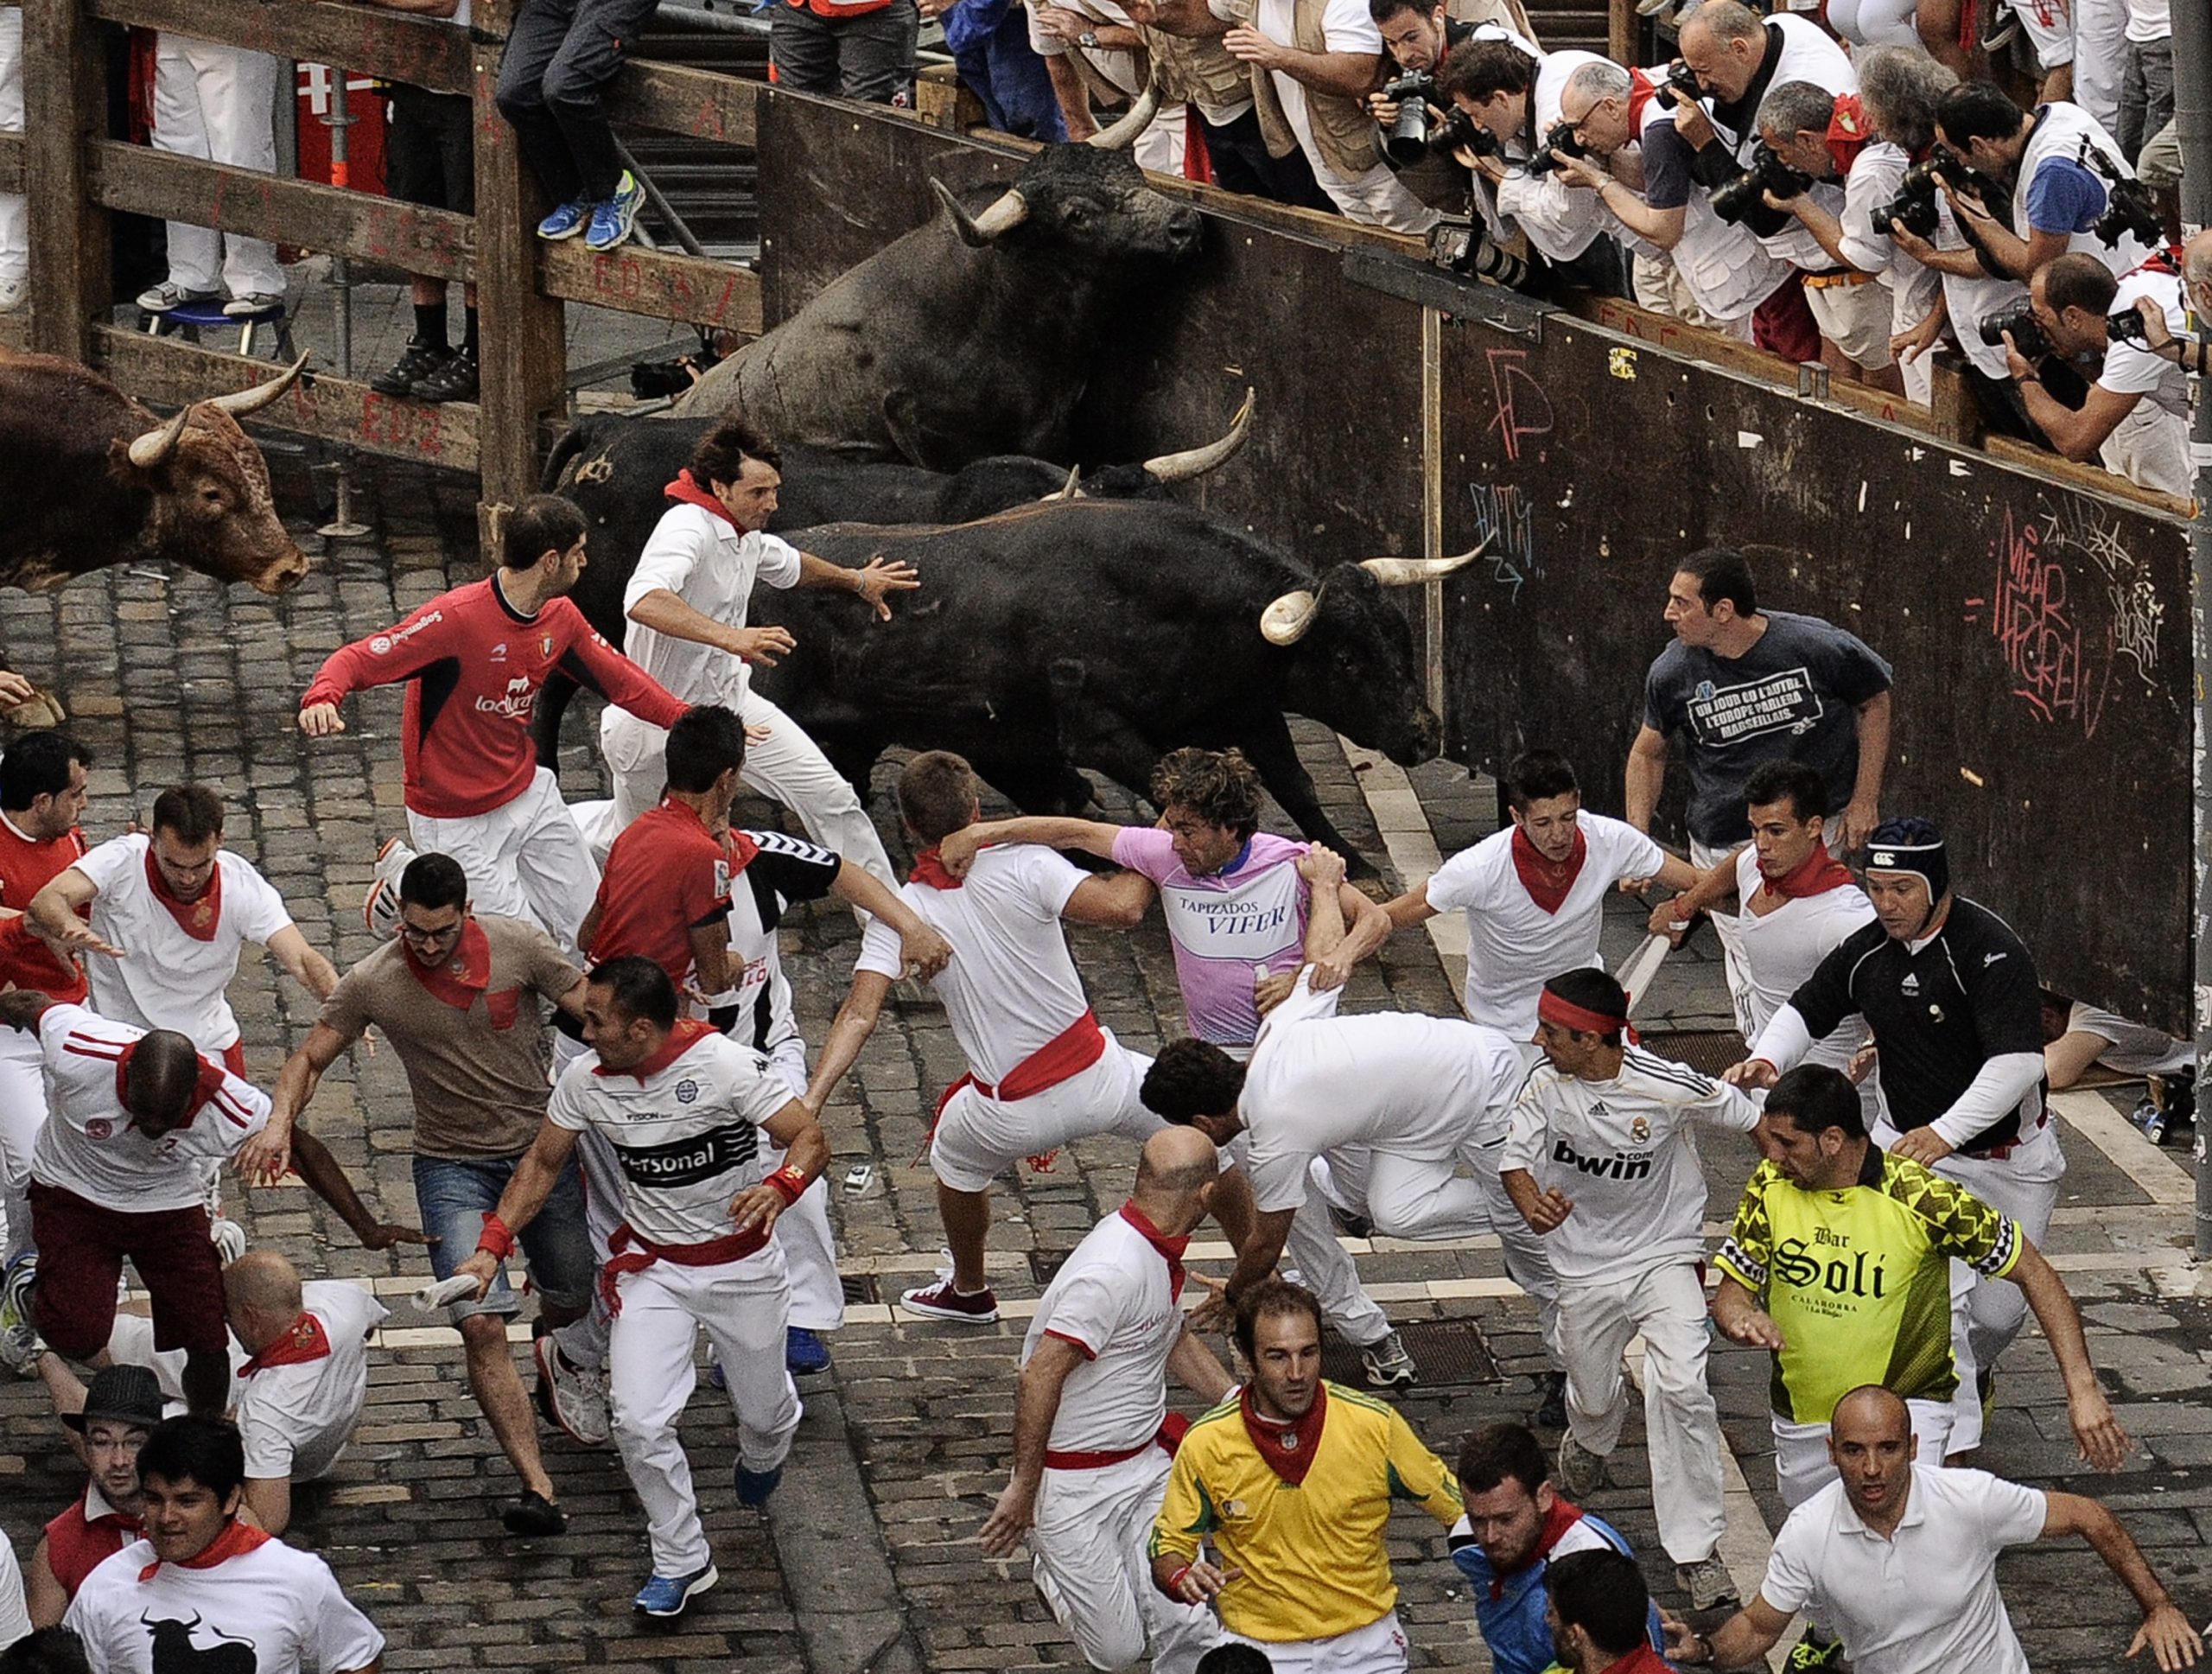 San Fermin Running Of The Bulls Enters Its Last Day